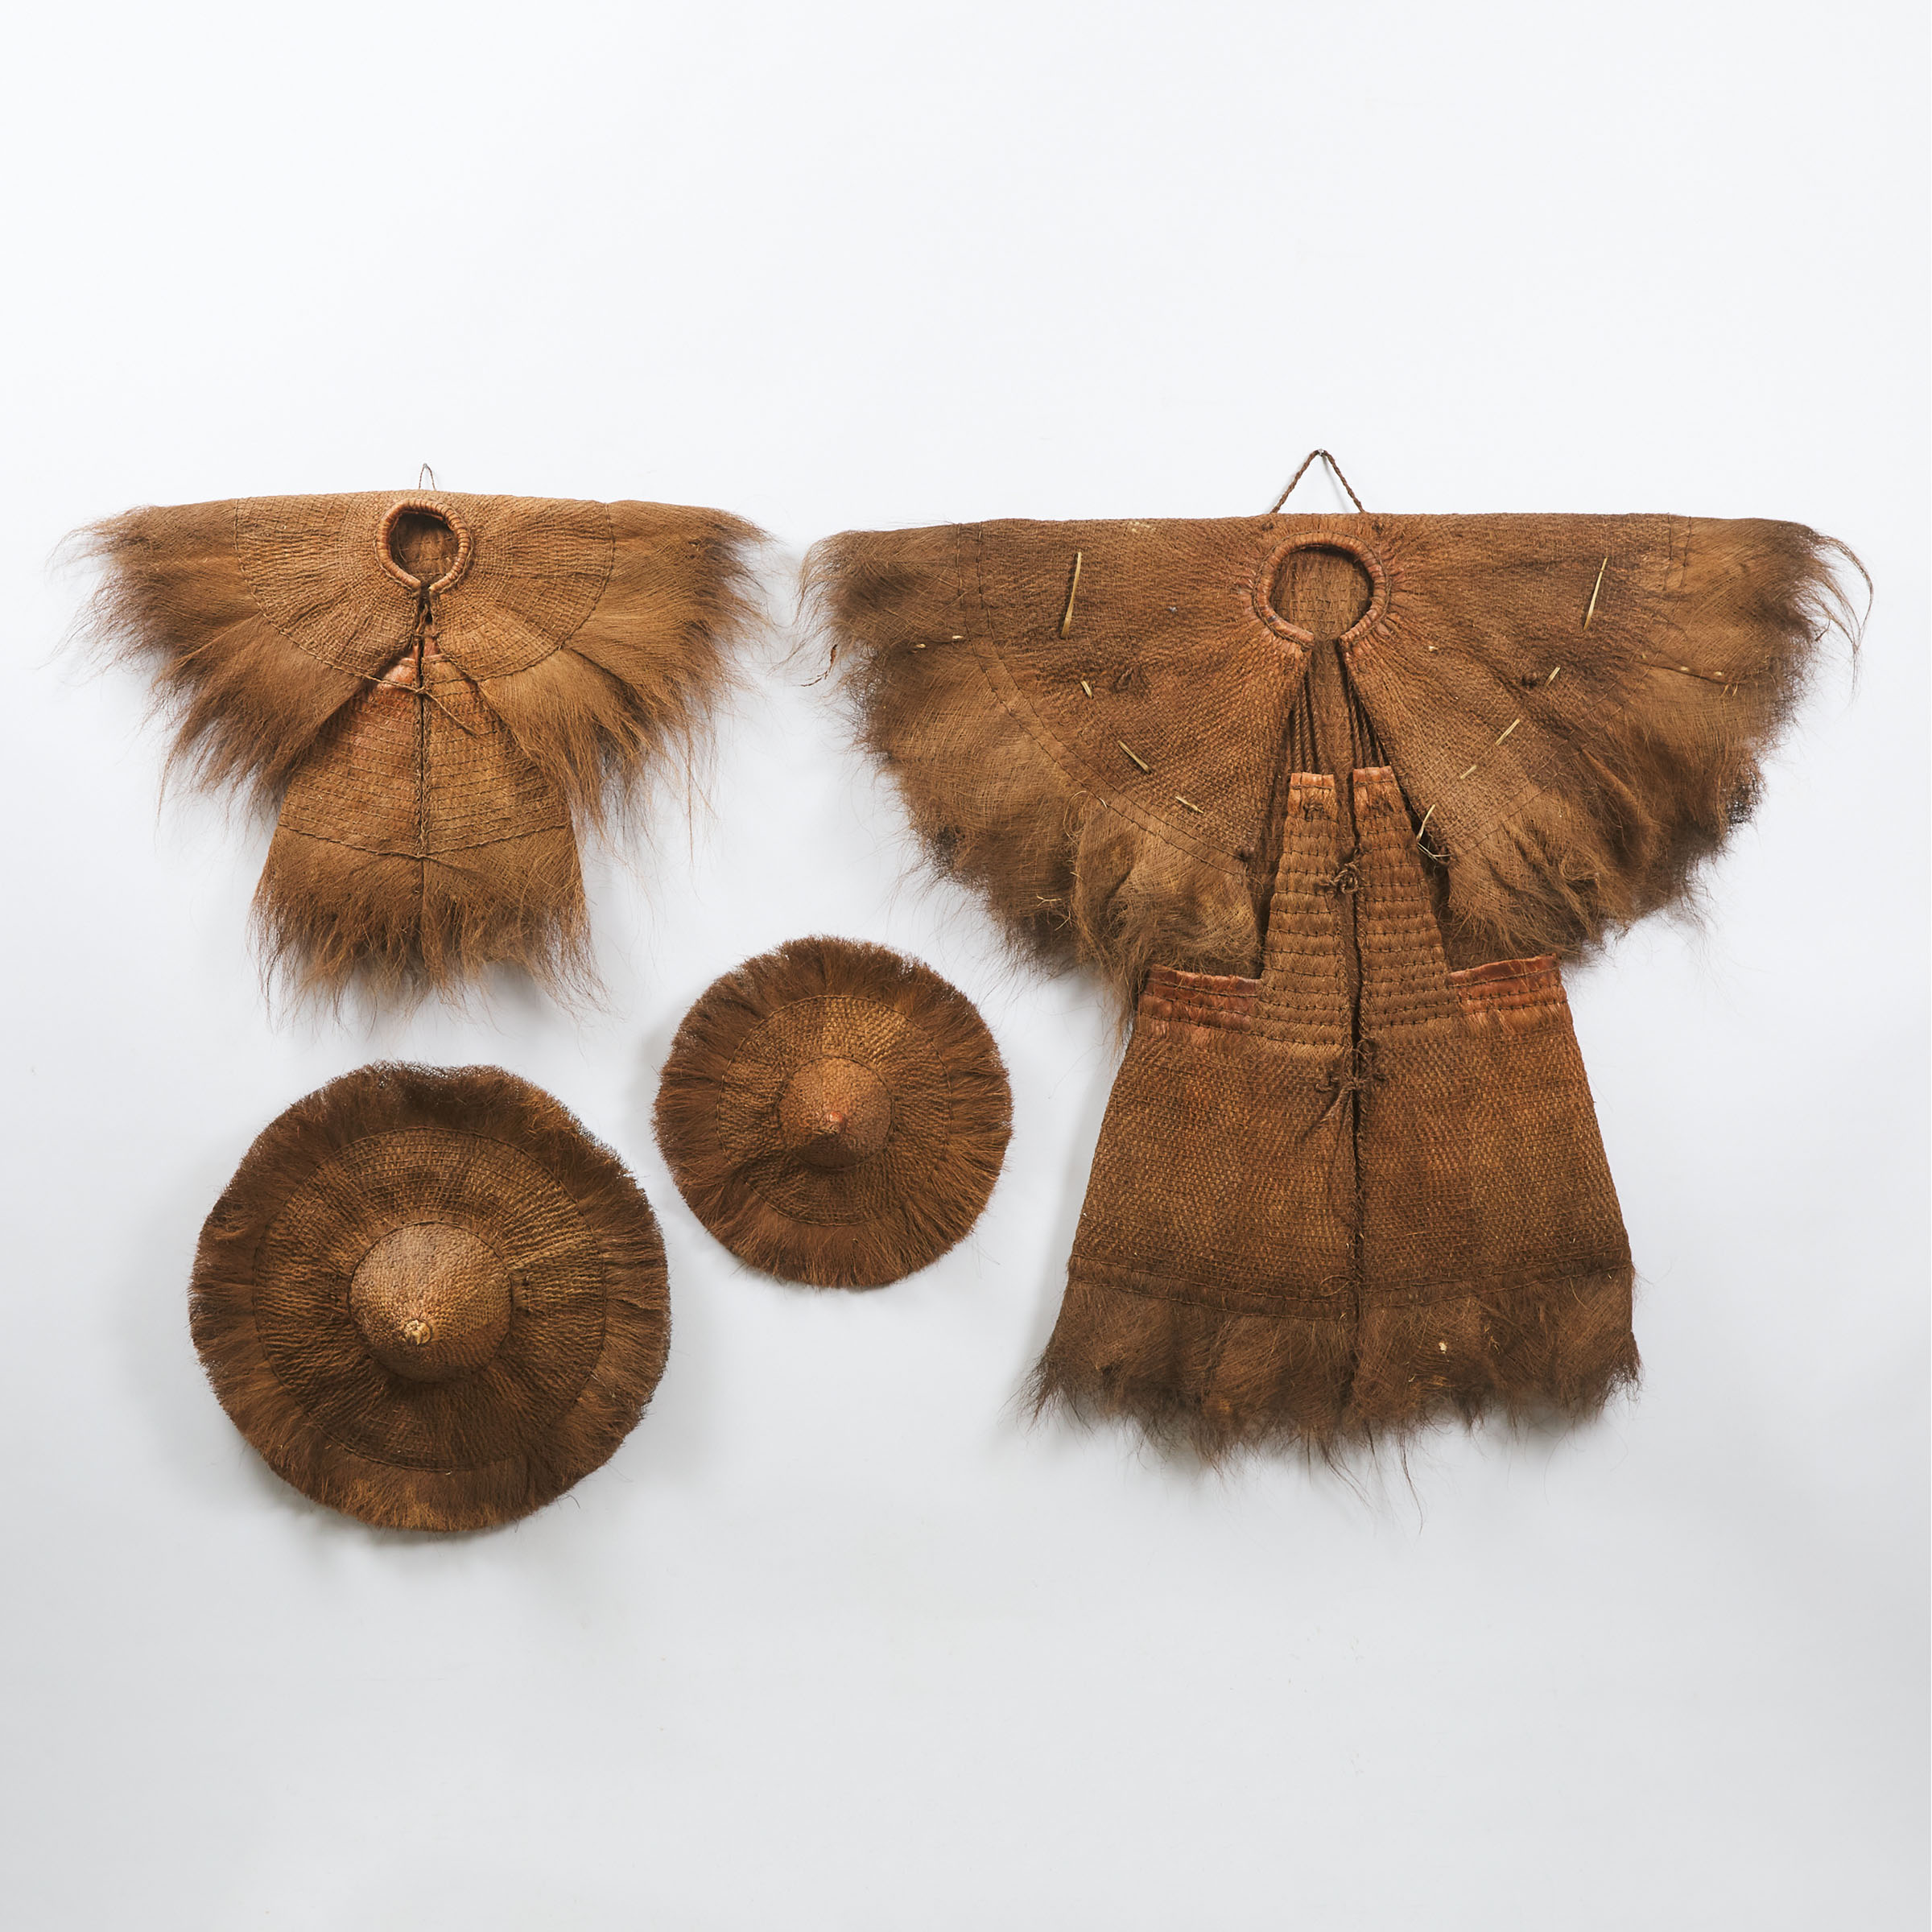 Two Southern Chinese Coir 'Raincoats' and a Hat, Chajing Province, 19th/early 20th century